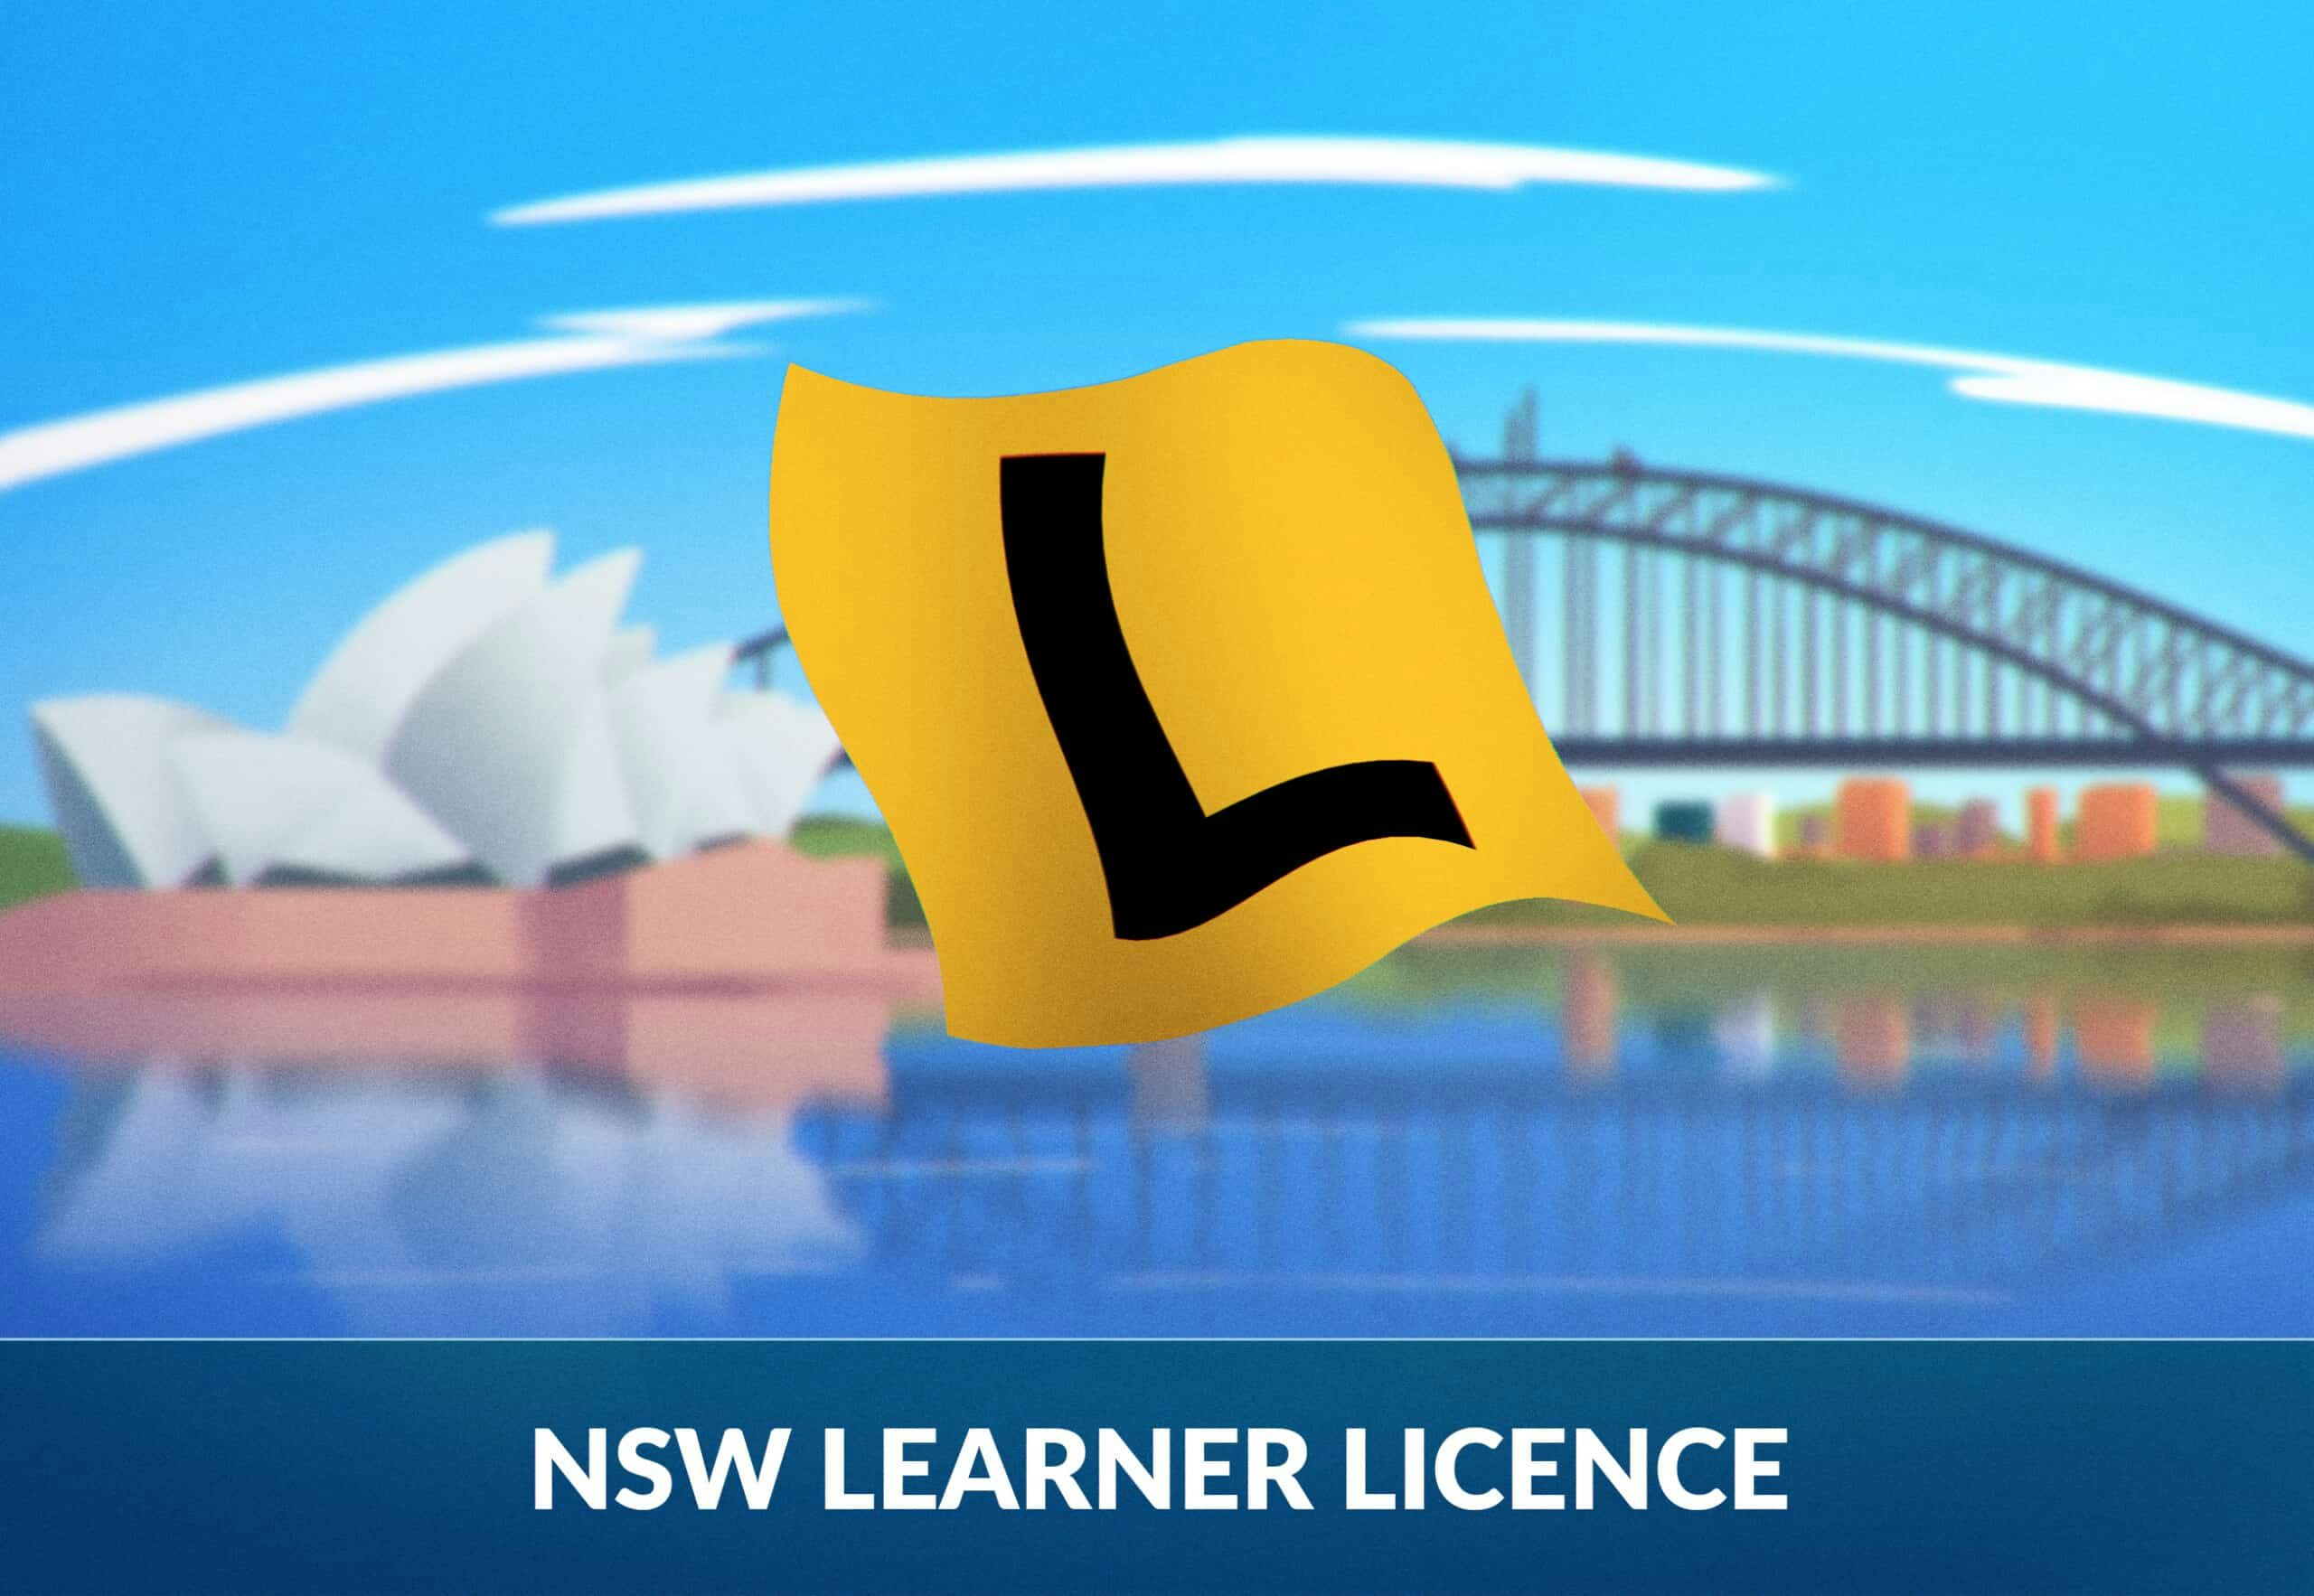 NSW learner licence